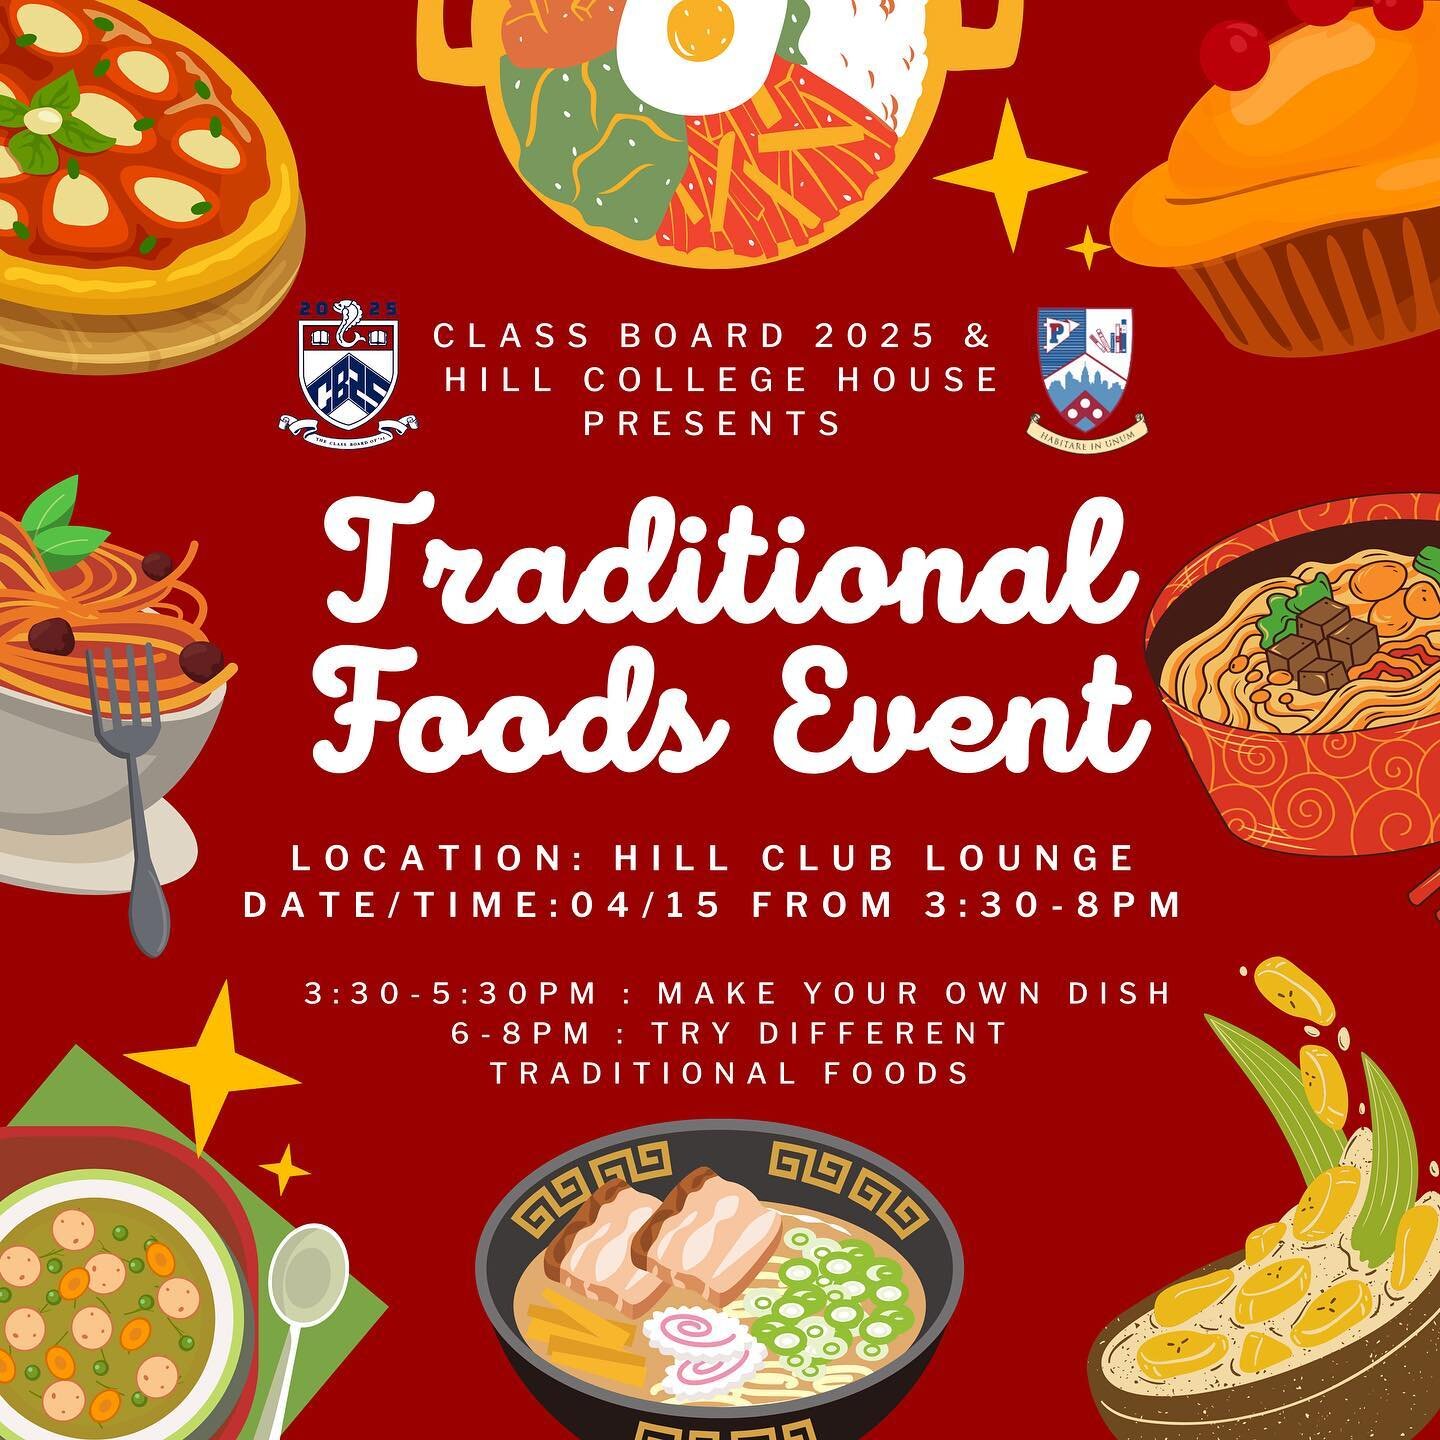 hi everyone! this Friday (04/15) the Class Board and Hill College House are throwing a Traditional Foods event in the Hill Club Lounge!!🥙🥗🥘 come from 3:30 to 5:30 to cook your dish or feel free to do it beforehand and everything will be served at 